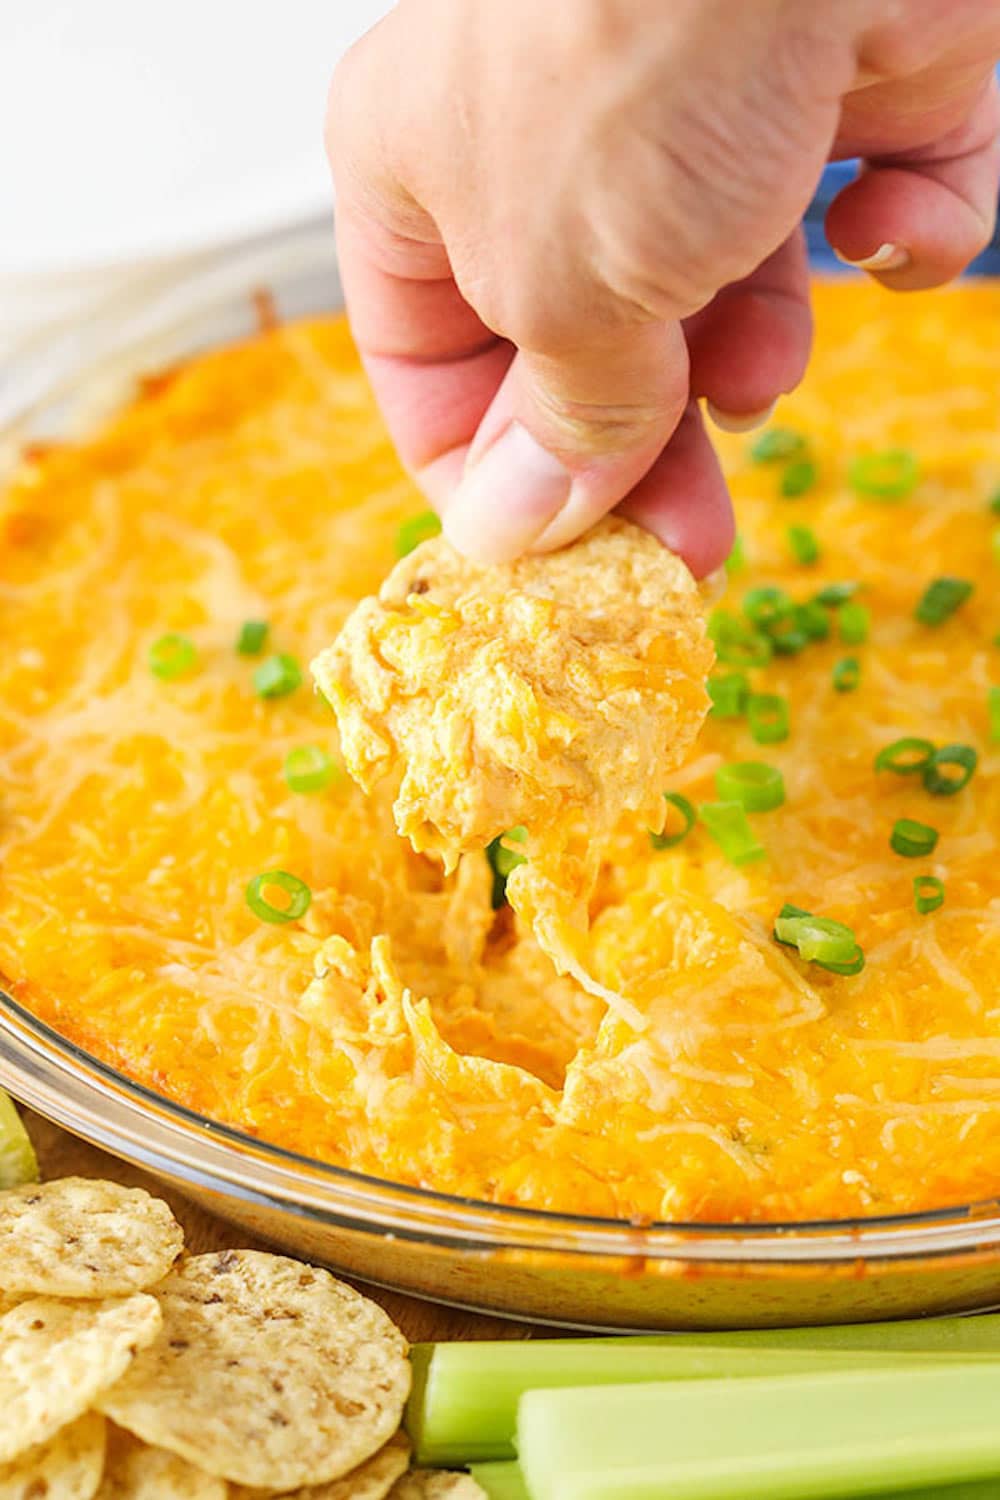 A Chip Scooping up some Cheesy Buffalo Dip from a Clear Bowl